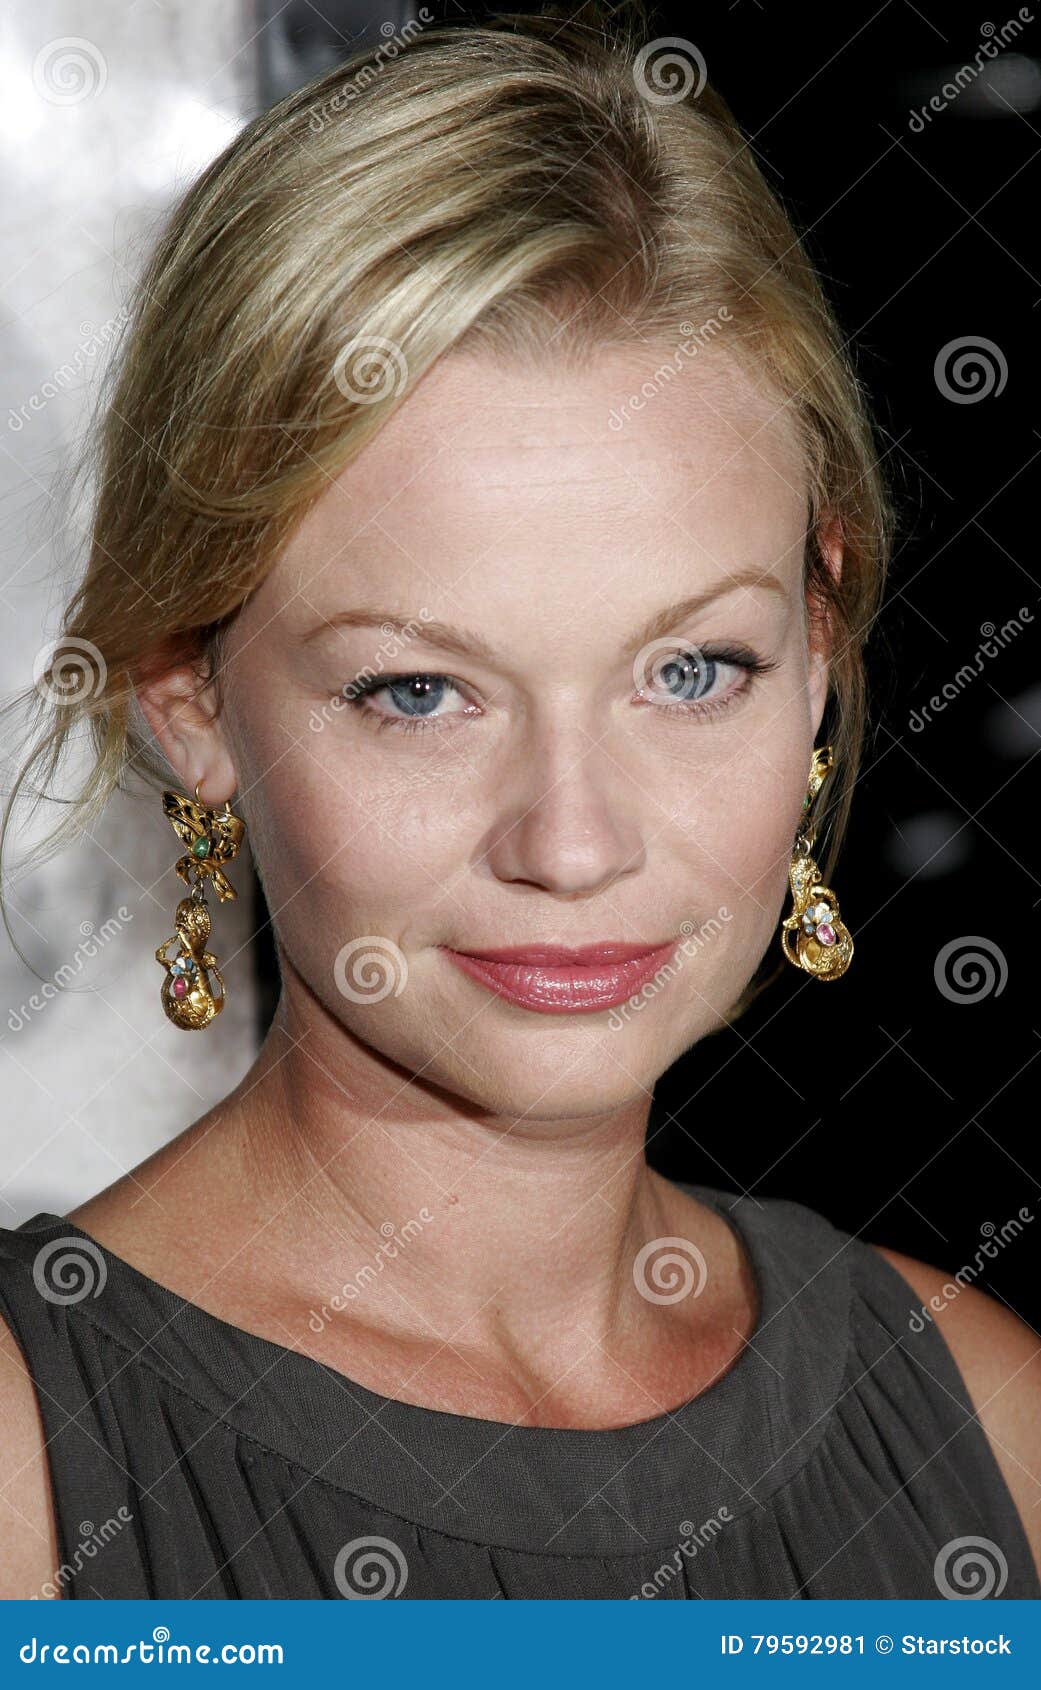 Of samantha mathis pictures ★ m.holymoly.com